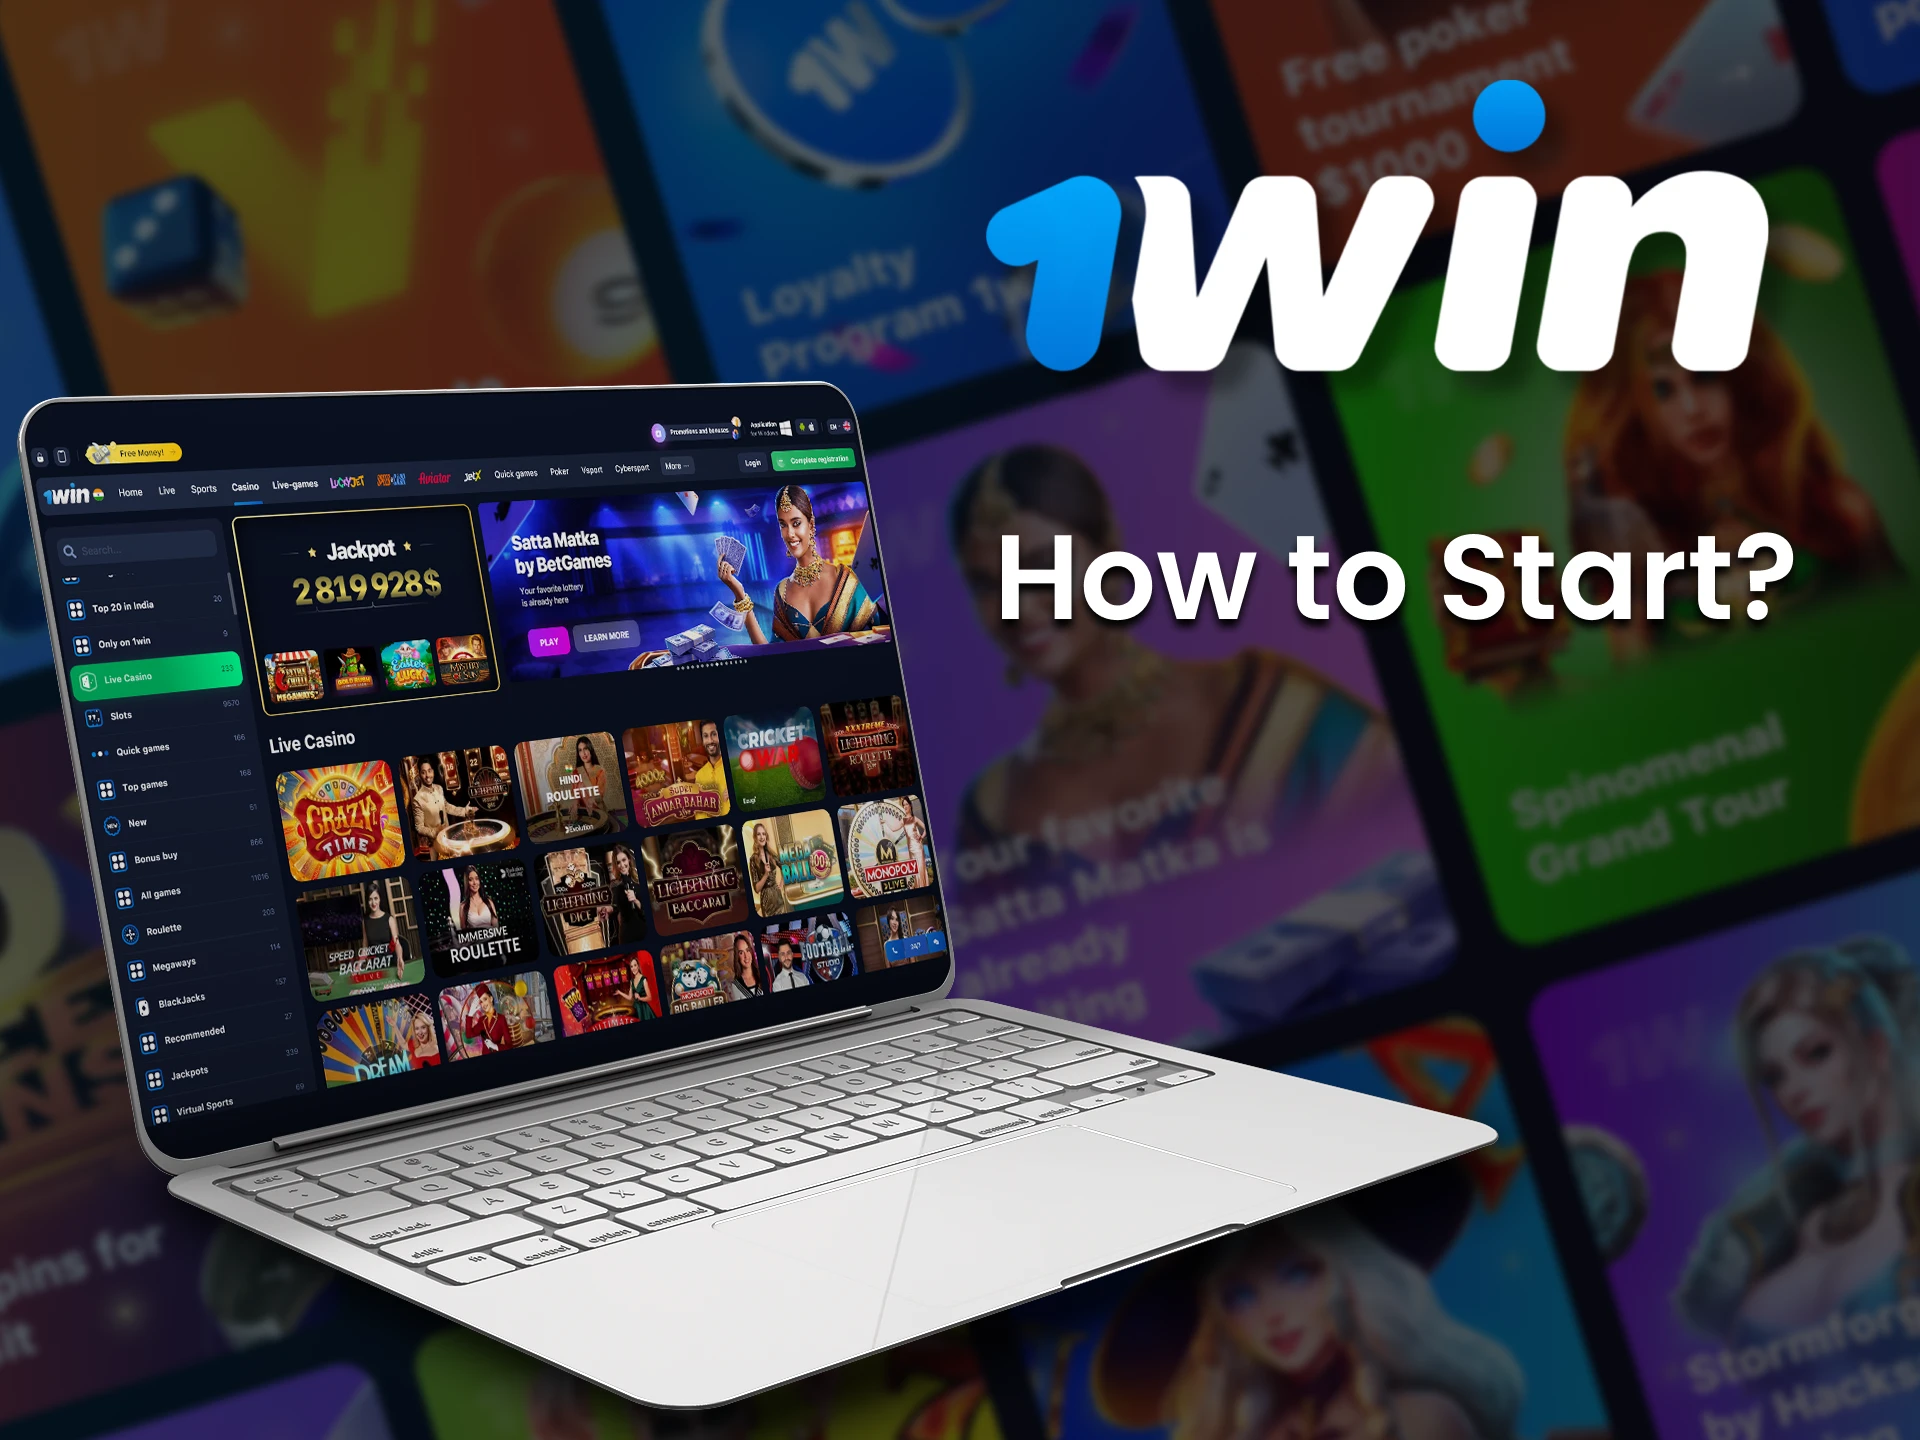 Go to the right section on 1win for live casino games.